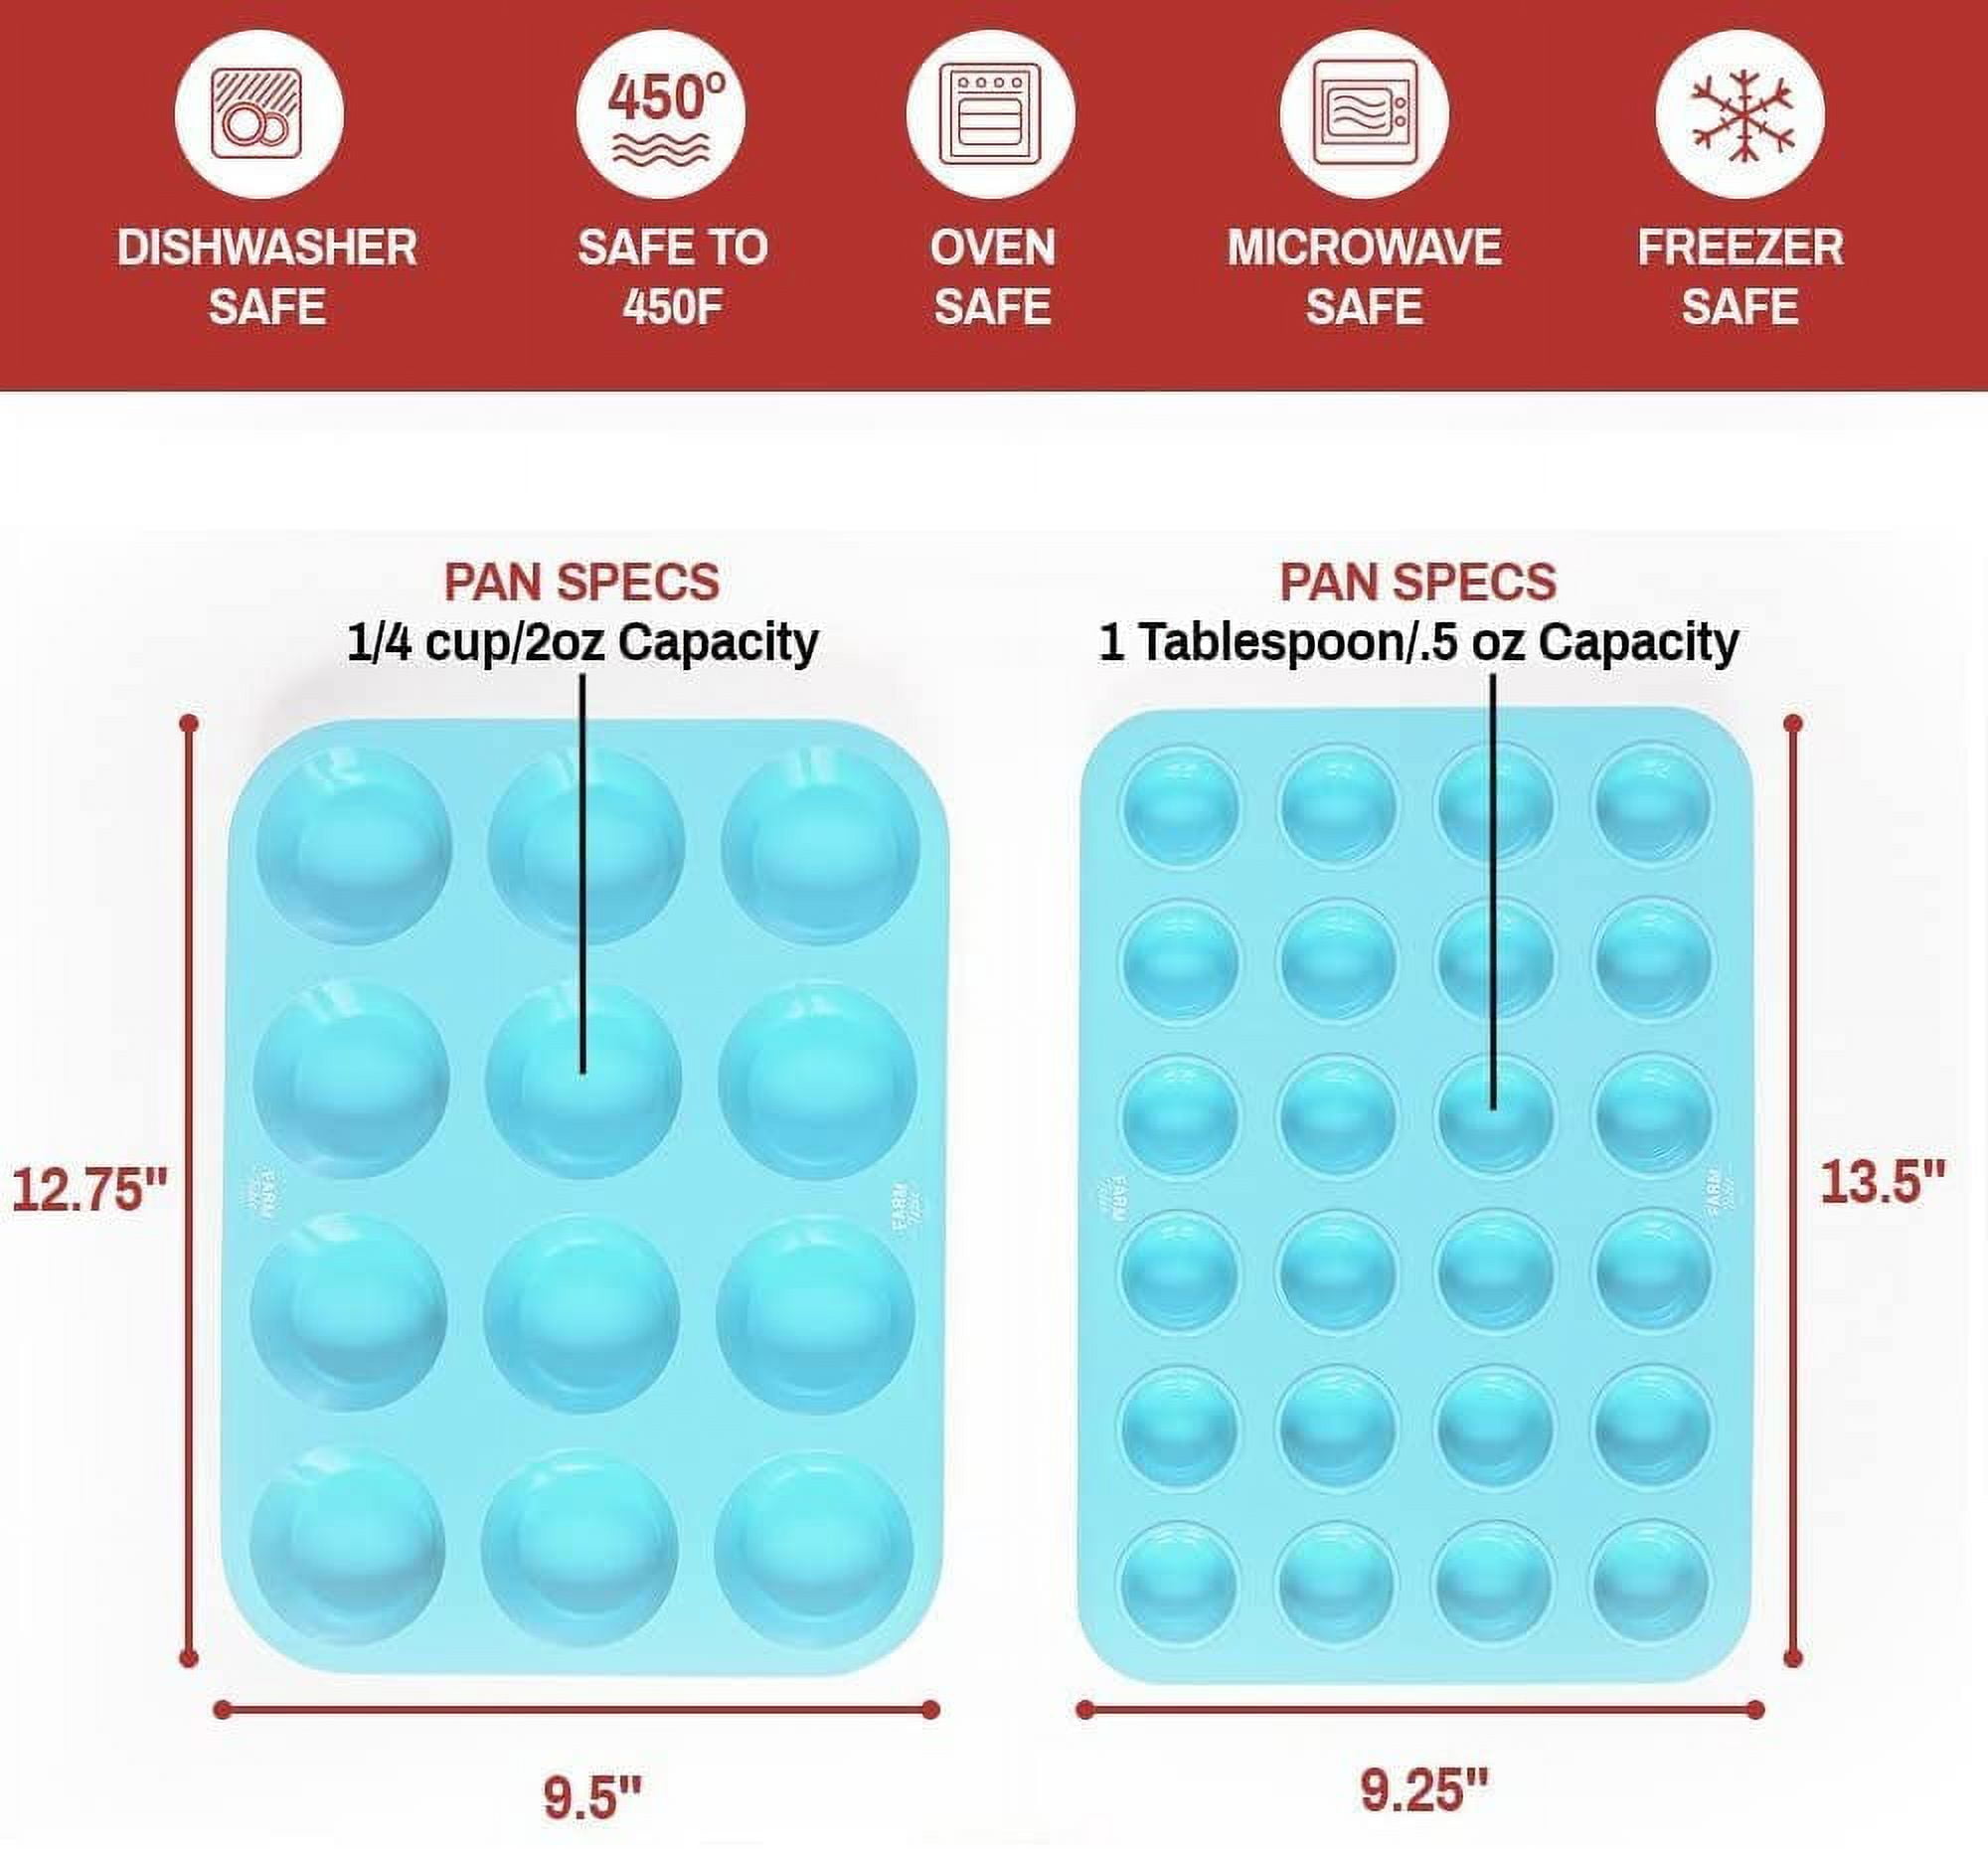 SILIVO Silicone Muffin Pans Nonstick 12 Cup(2 Pack) - 2.5 inch Silicone  Cupcake Pan - Silicone Baking Molds for Homemade Muffins, Cupcakes and Egg